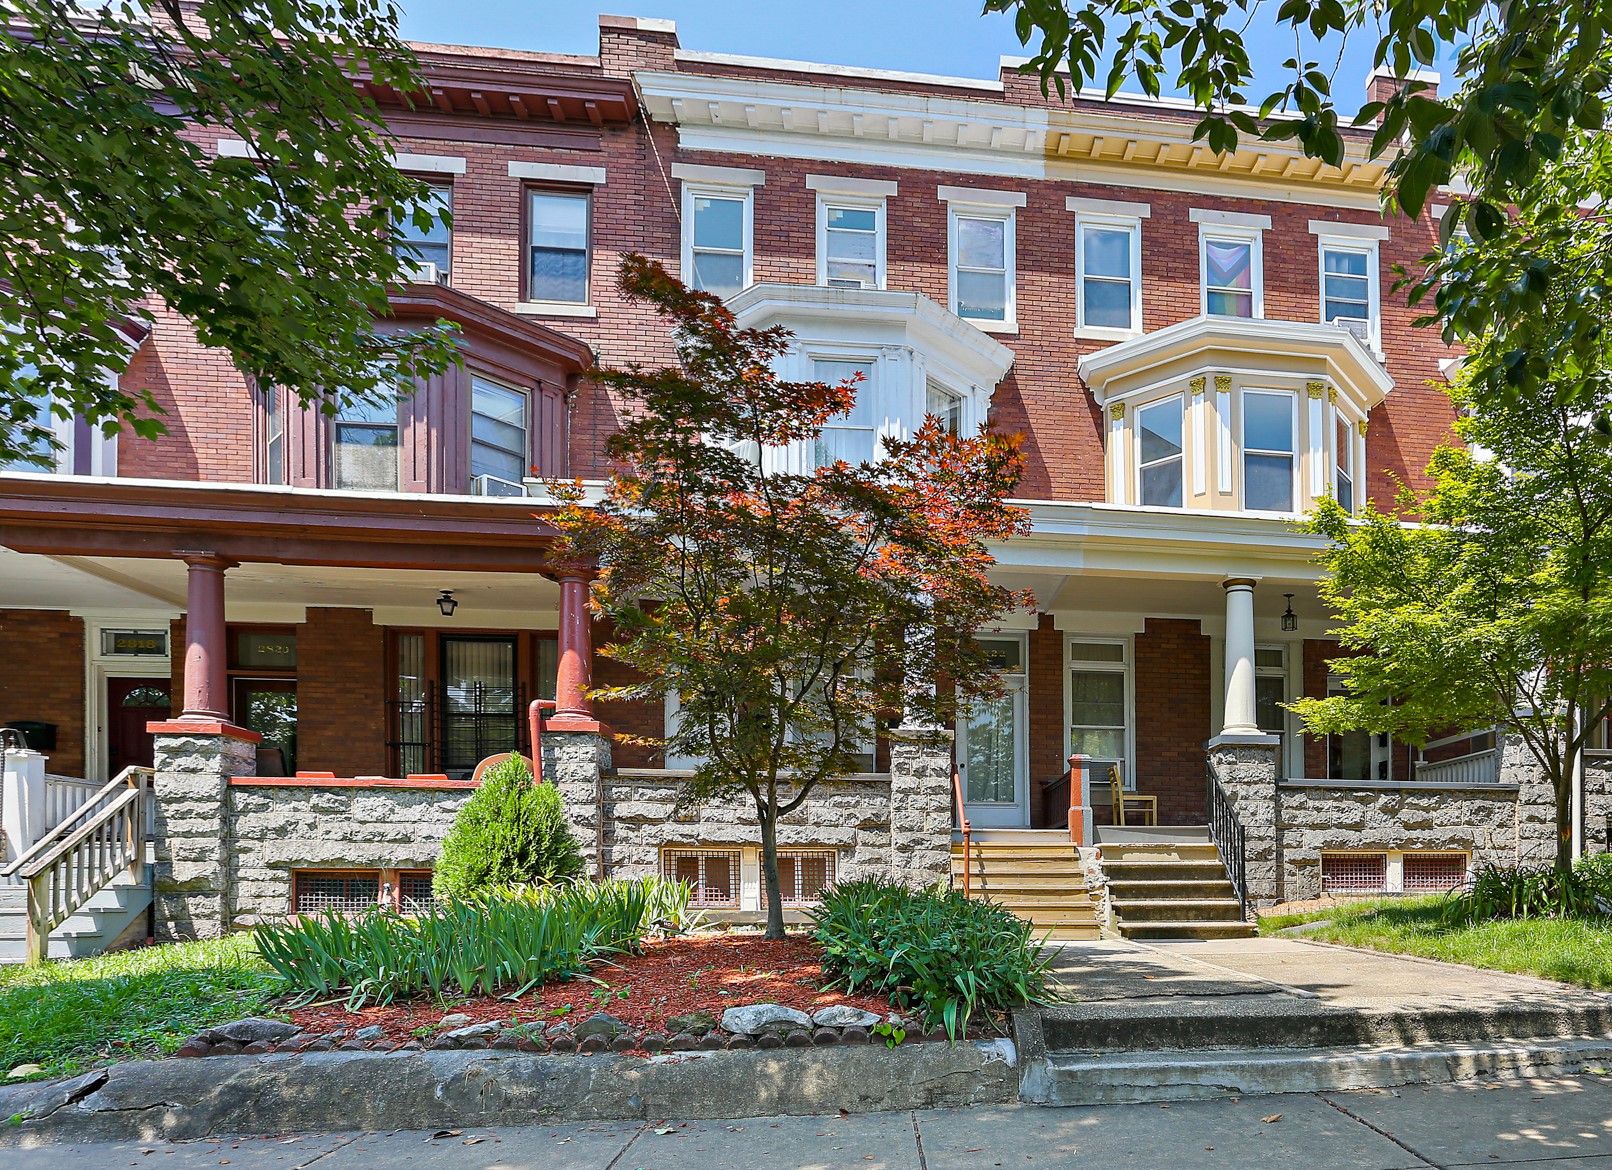 2822 Guilford Avenue: 3 Apartments in Charles Village